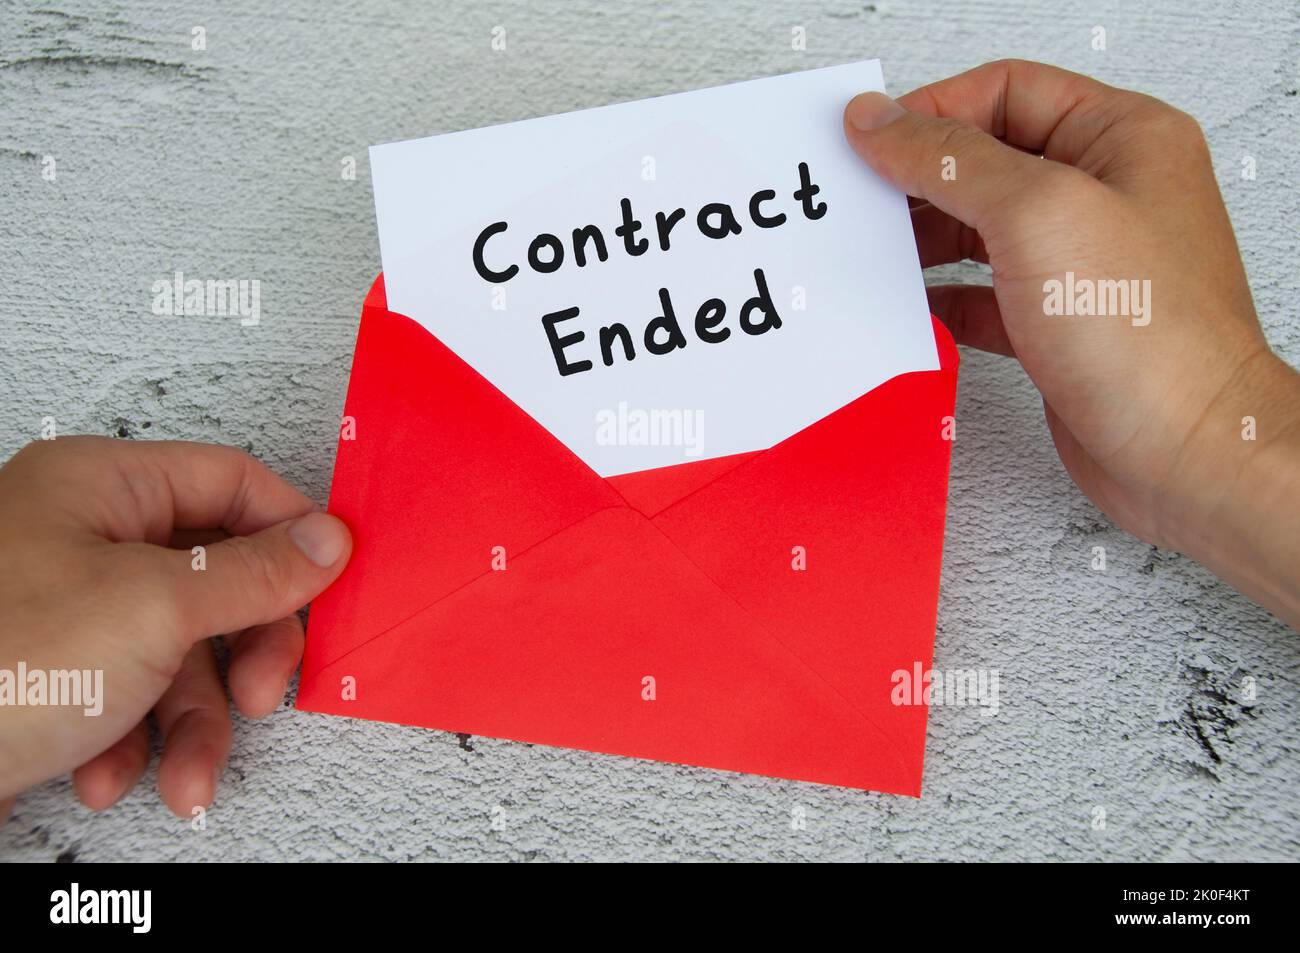 Contract ended text on white notepad with red envelope background. Employment concept. Stock Photo